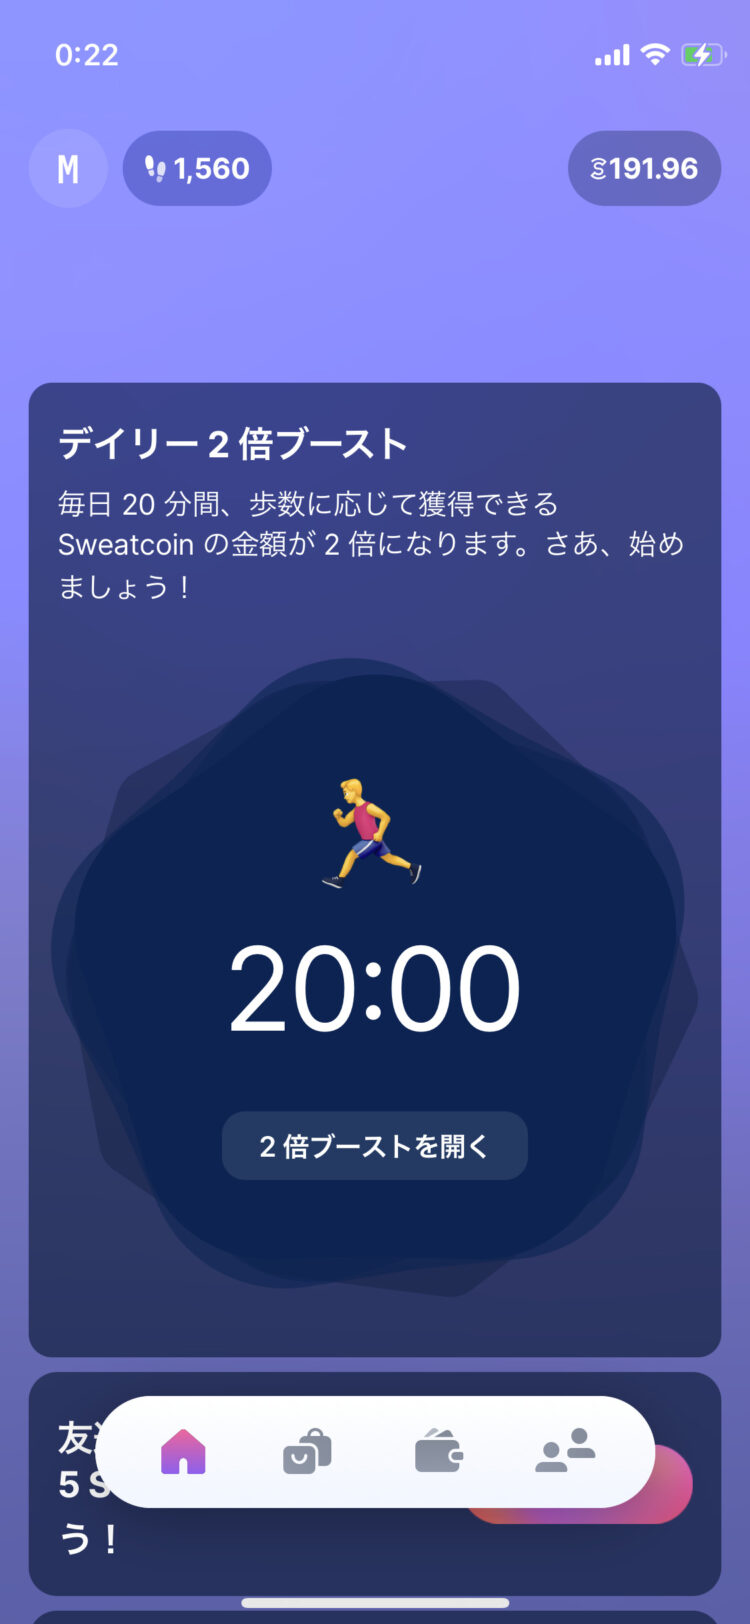 Sweatcoinデイリー2倍ブースト画面